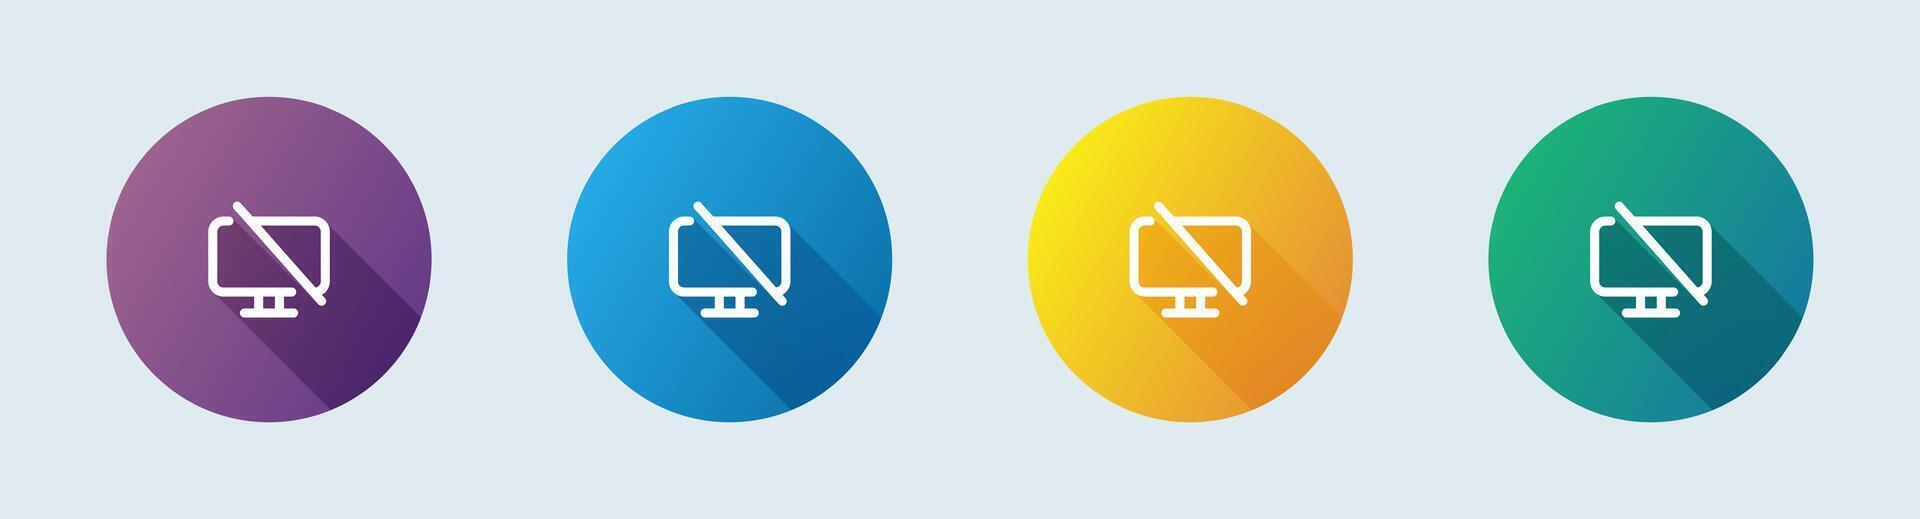 No display line icon in flat design style. Monitor signs vector illustration.